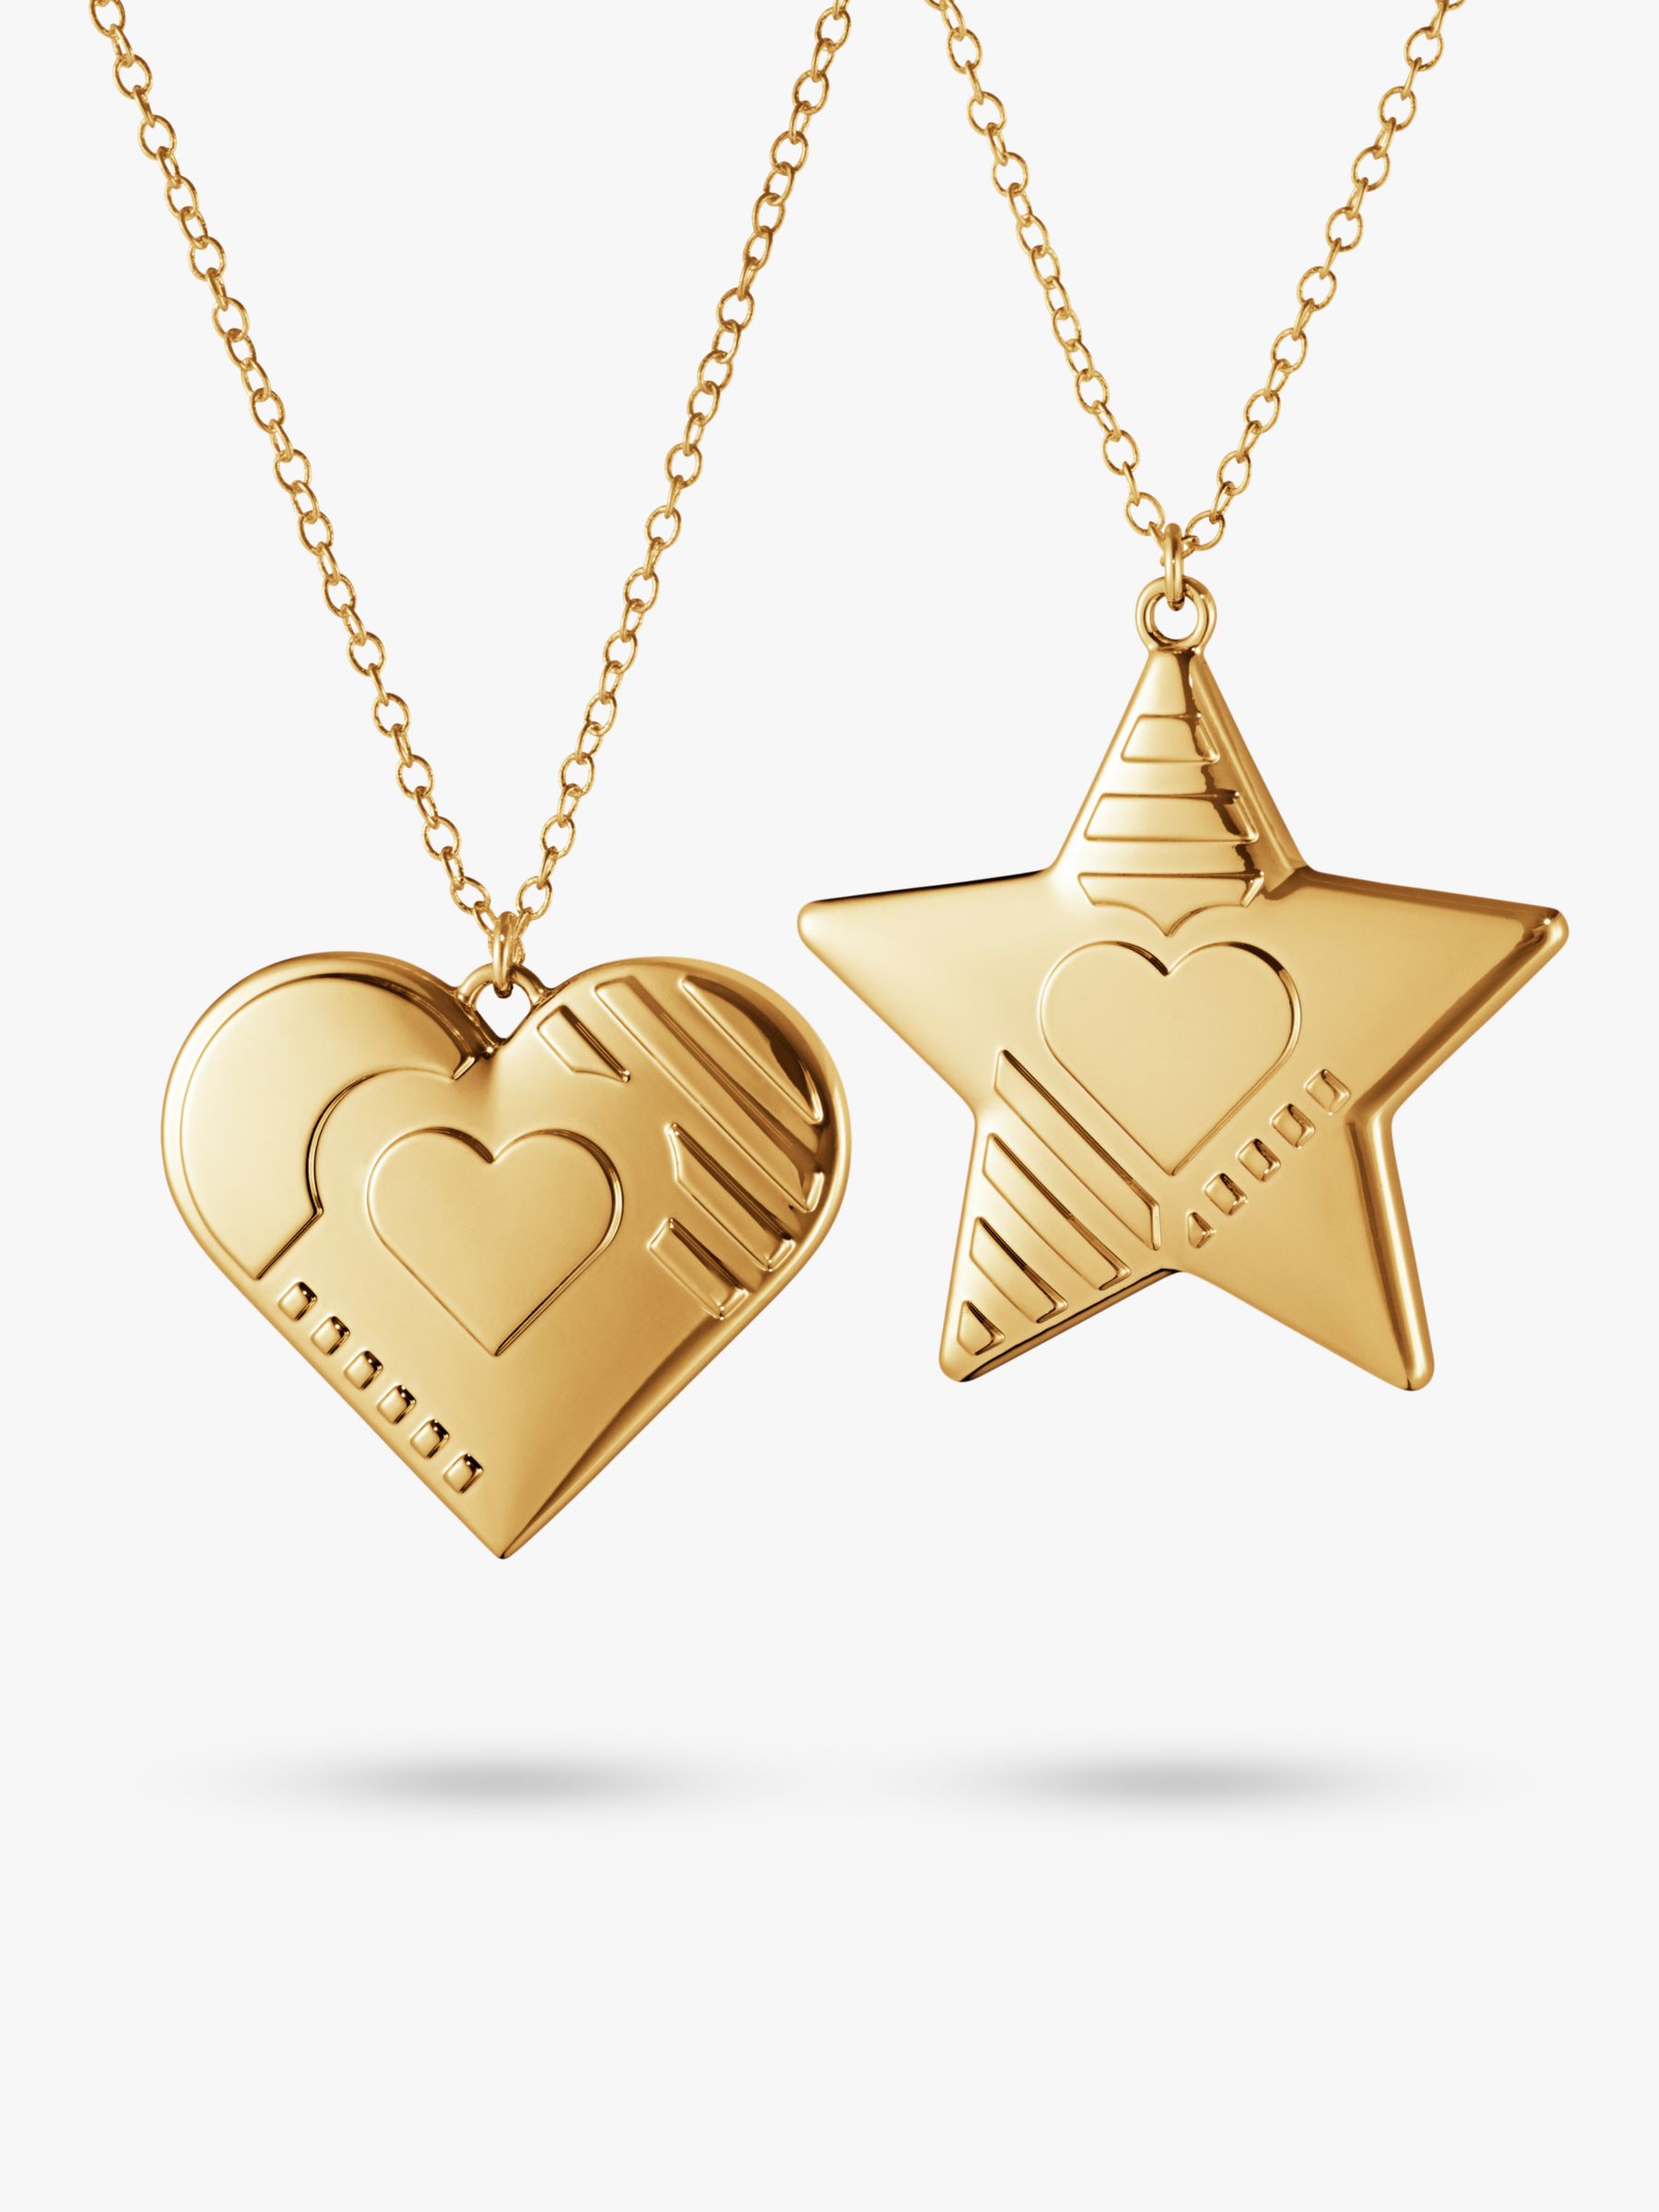 Georg Jensen Christmas Heart and Star 2019 Tree Decorations with Chains, Gold